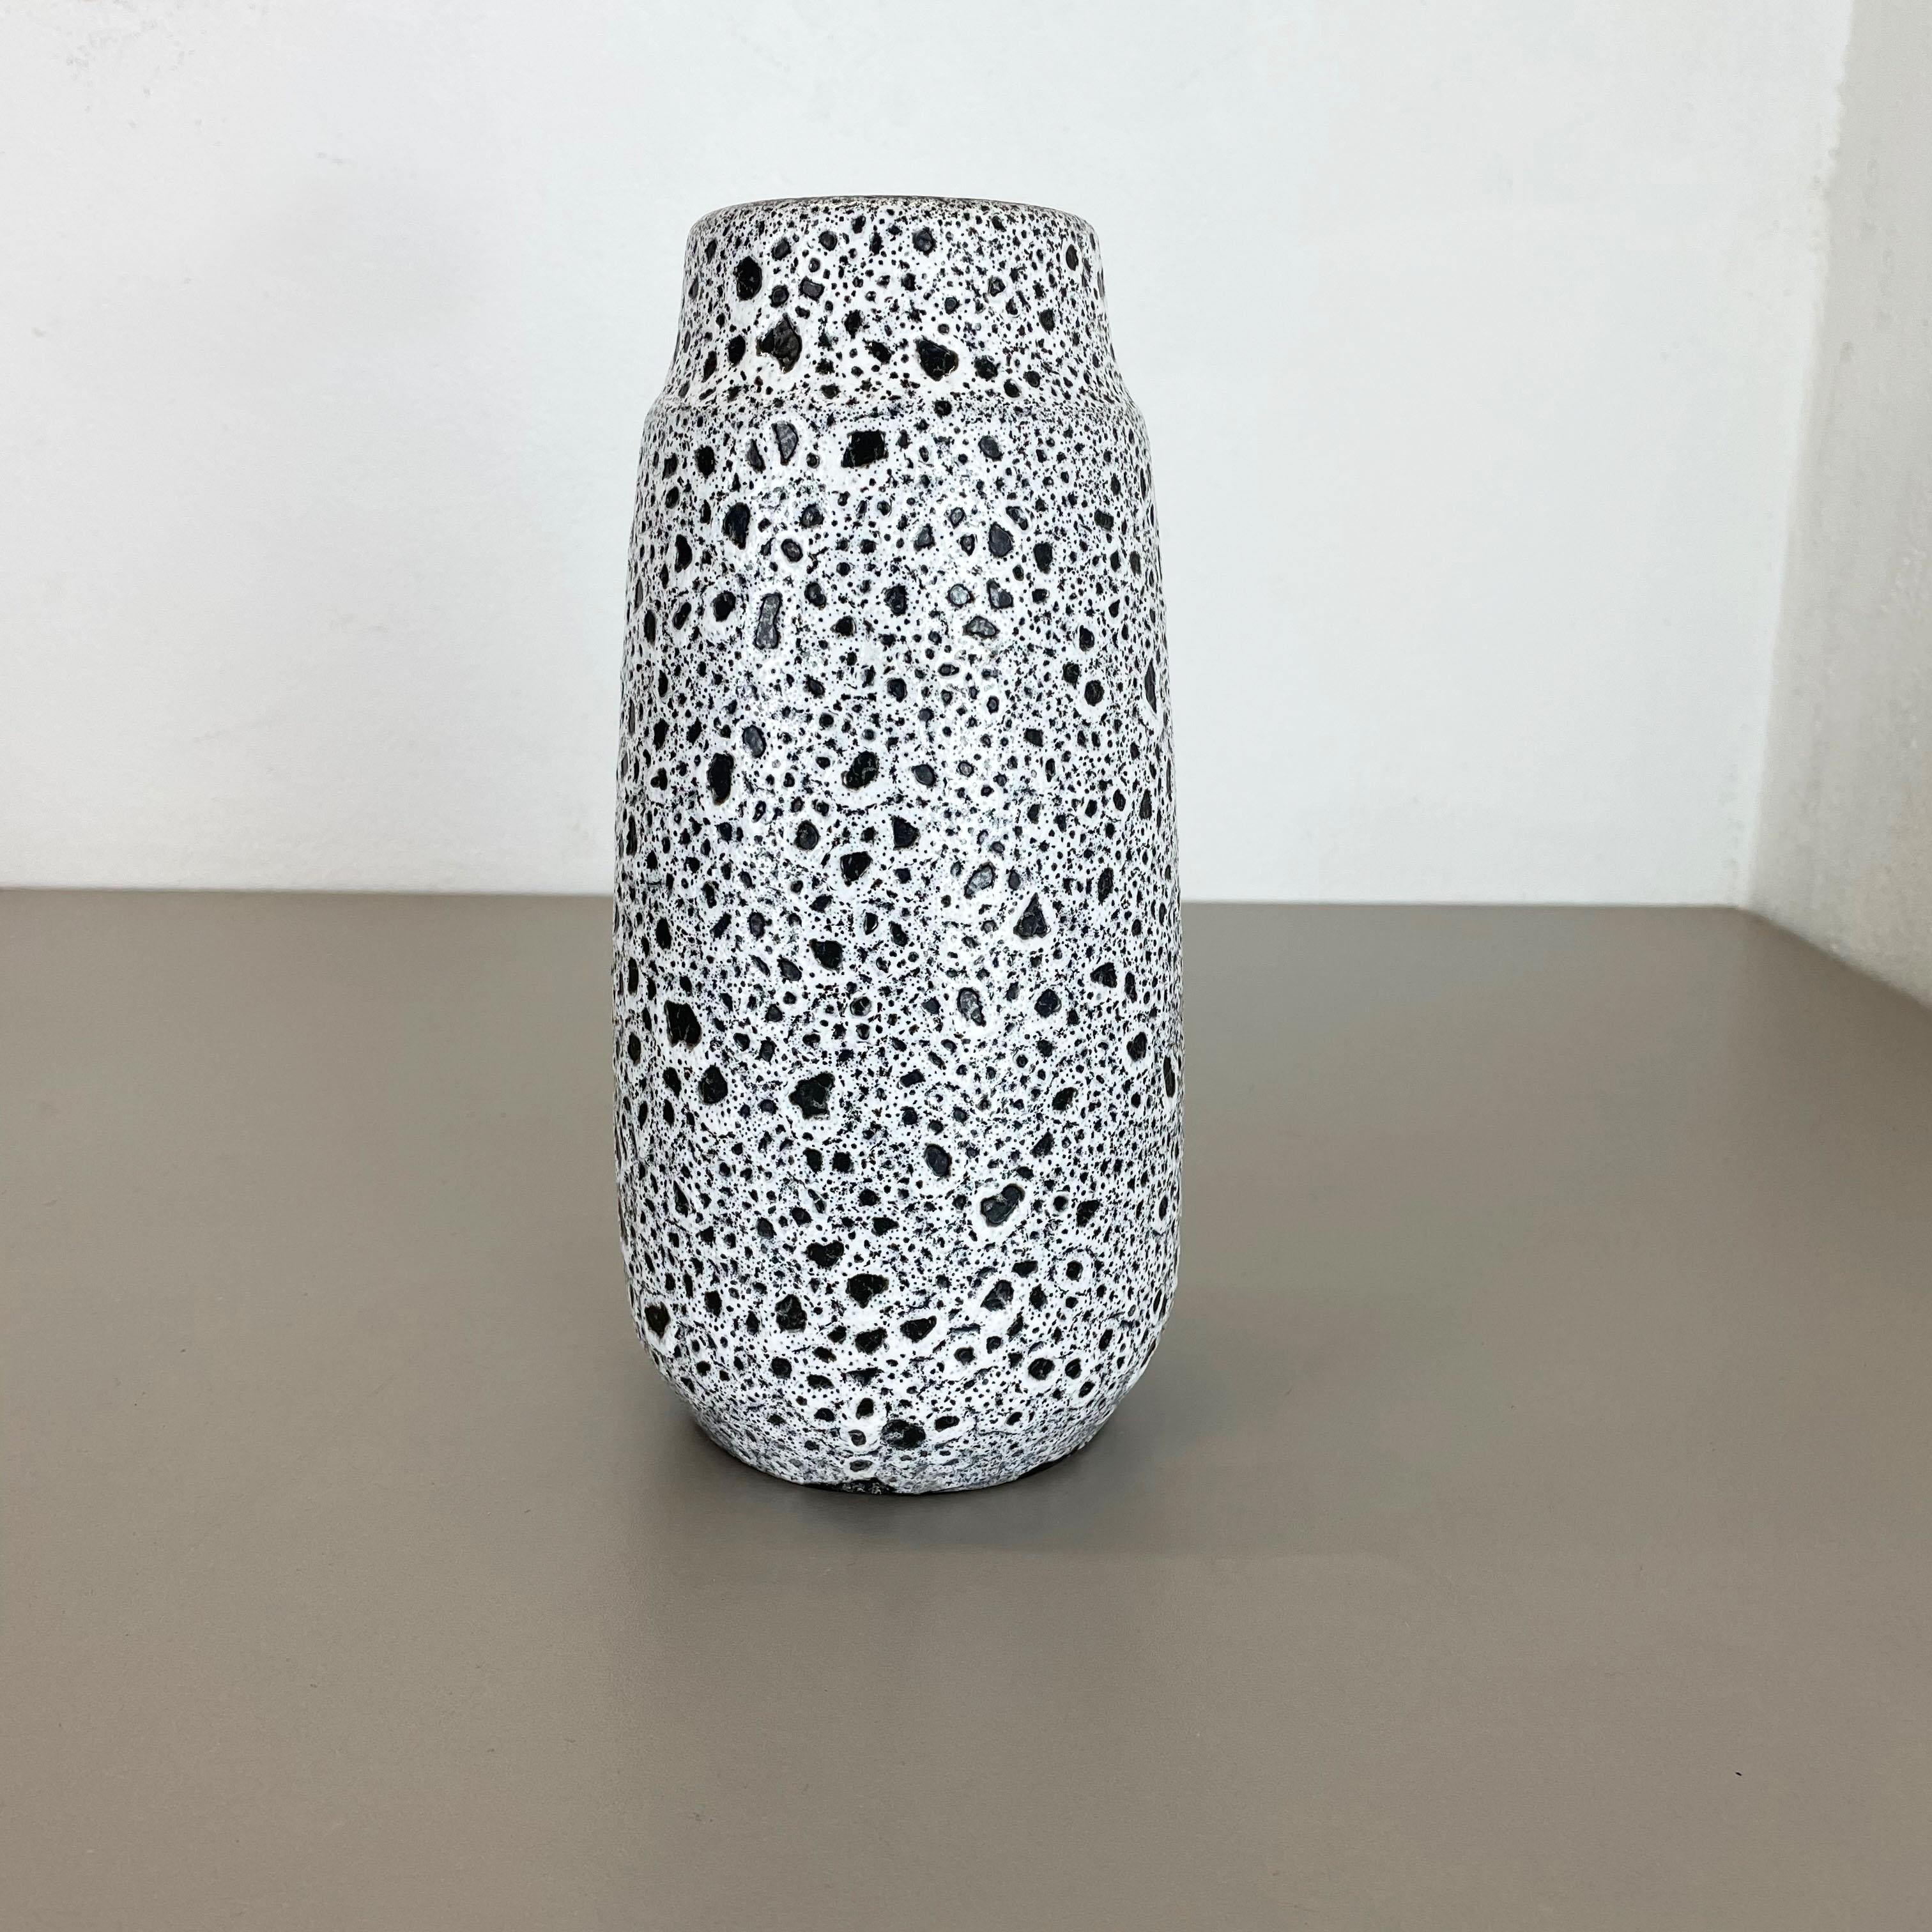 Article:

Fat lava art vase, heavy Brutalist glaze


Producer:

Scheurich, Germany



Decade:

1970s




This original vintage vase was produced in the 1970s in Germany. It is made of ceramic pottery in fat lava optic with abstract